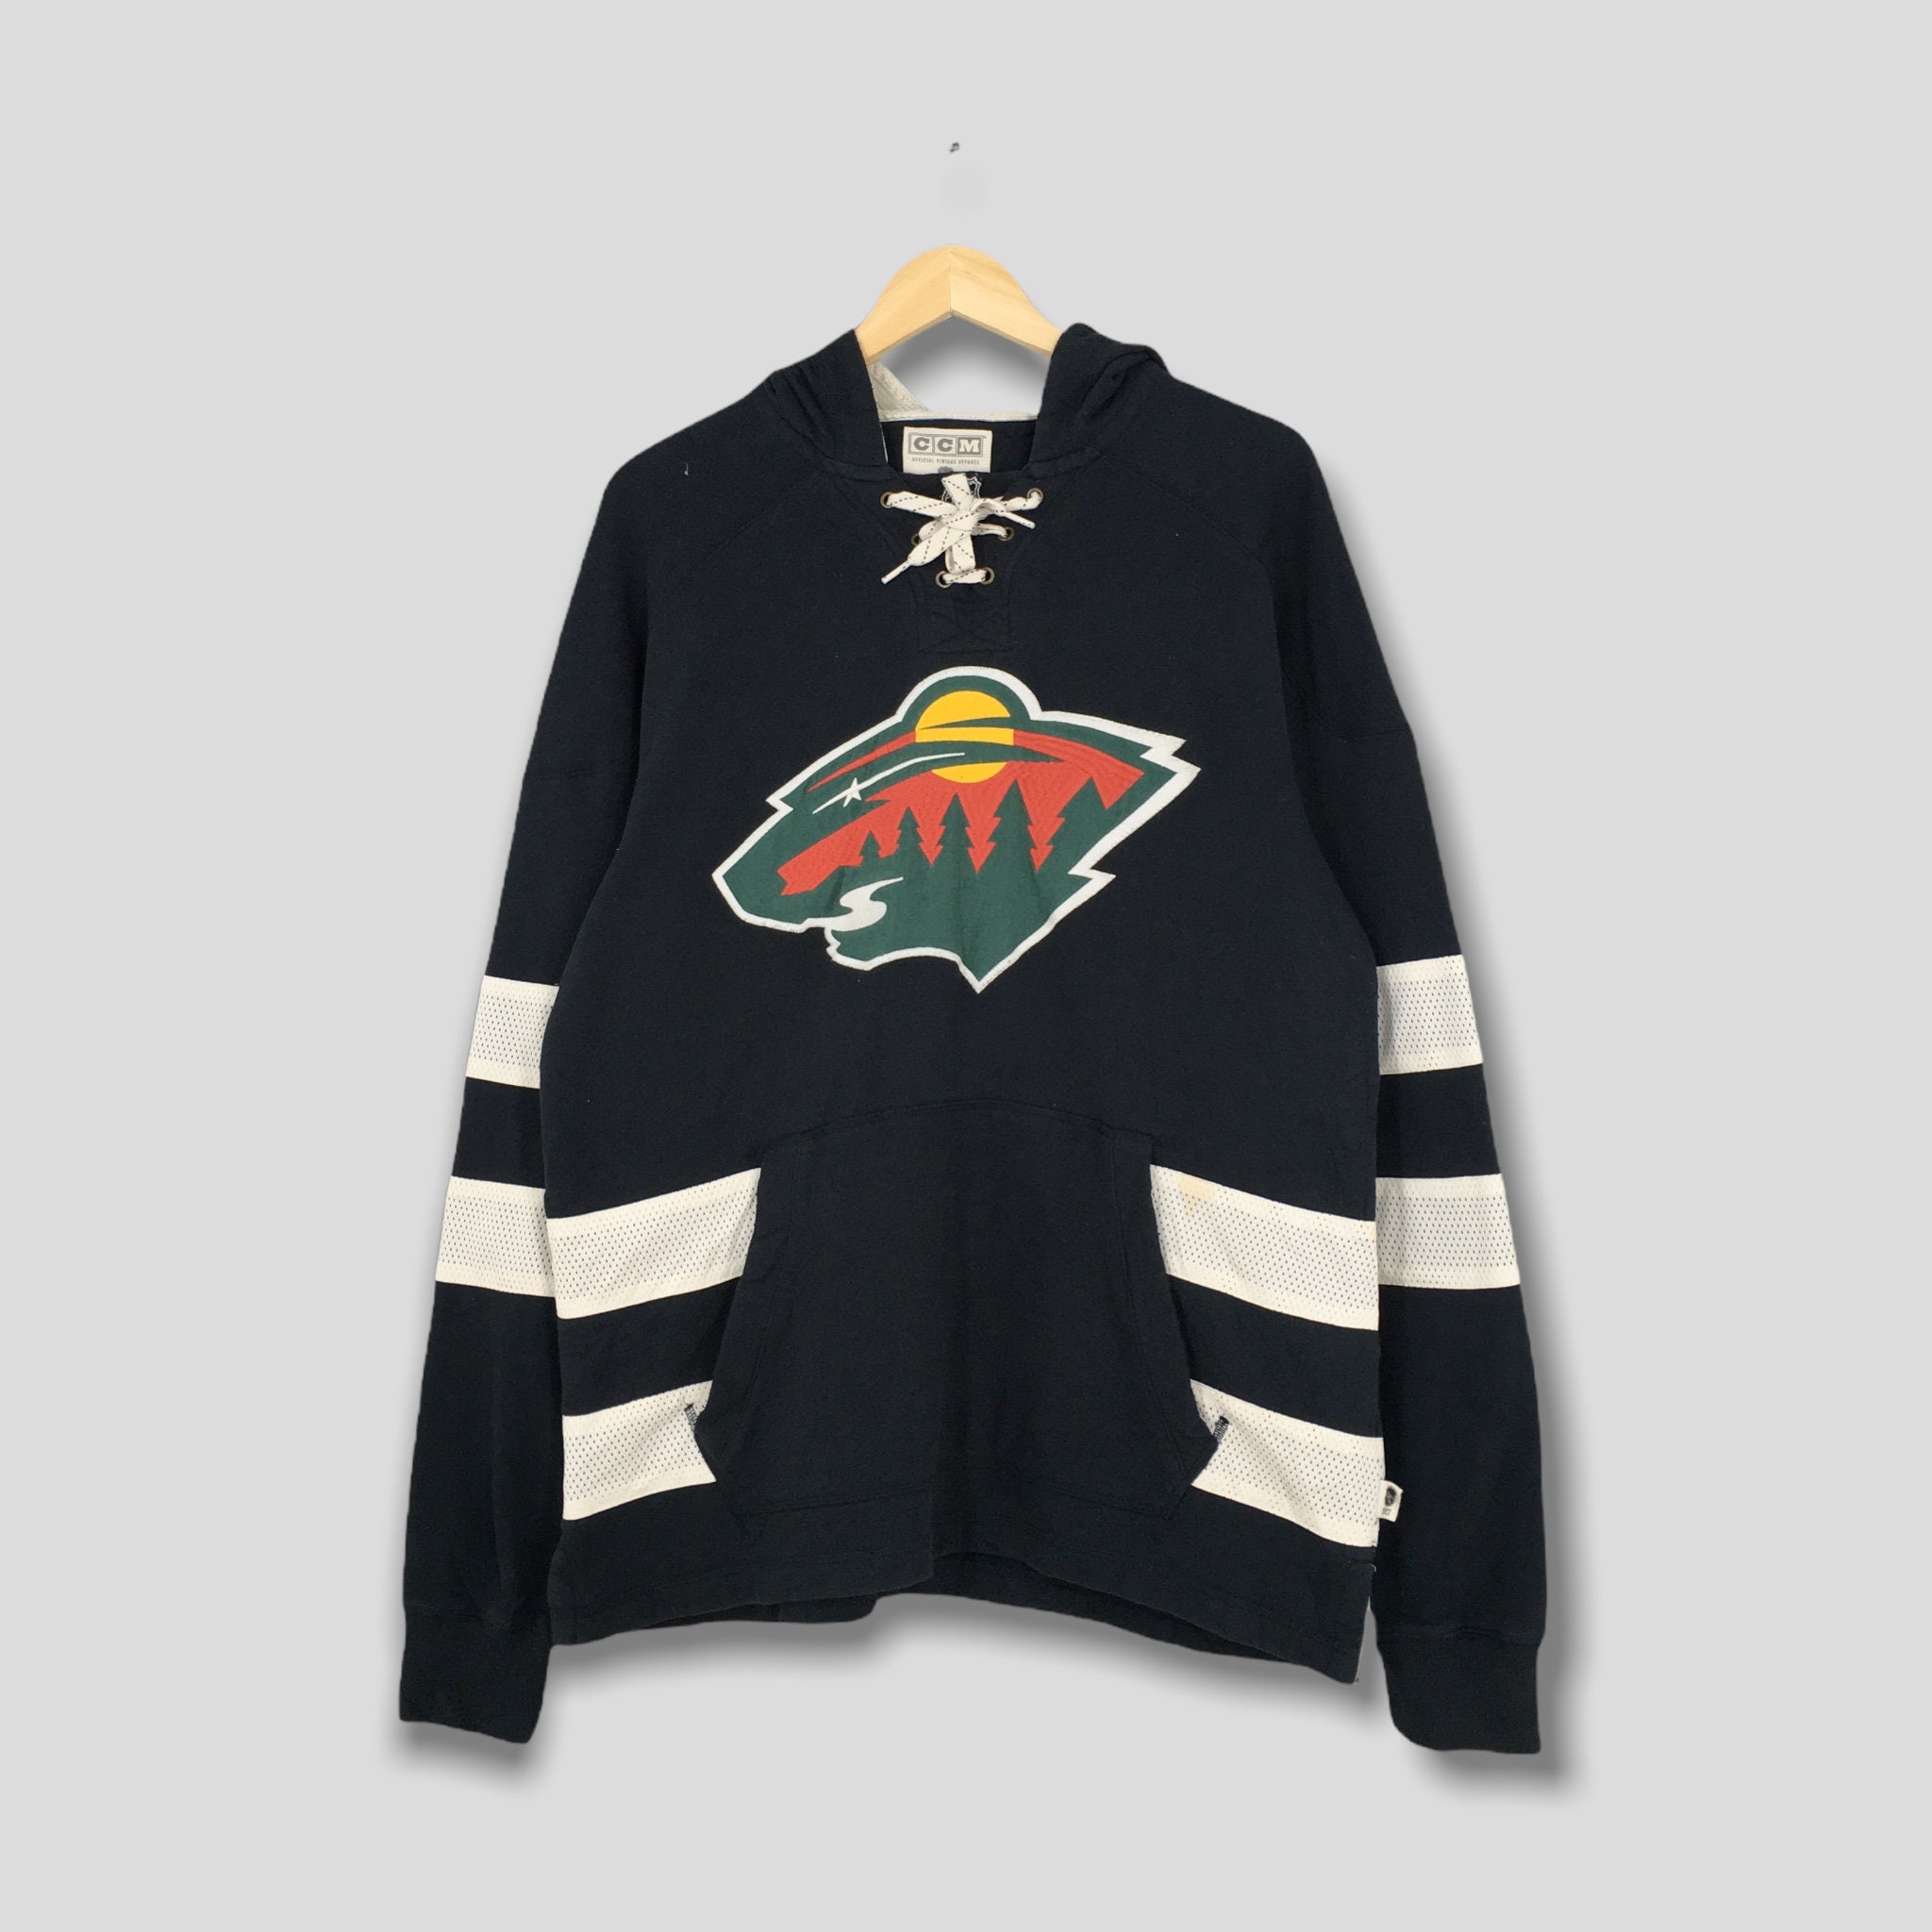 MN Wild Christmas Sweater Last Minute Gift - Personalized Gifts